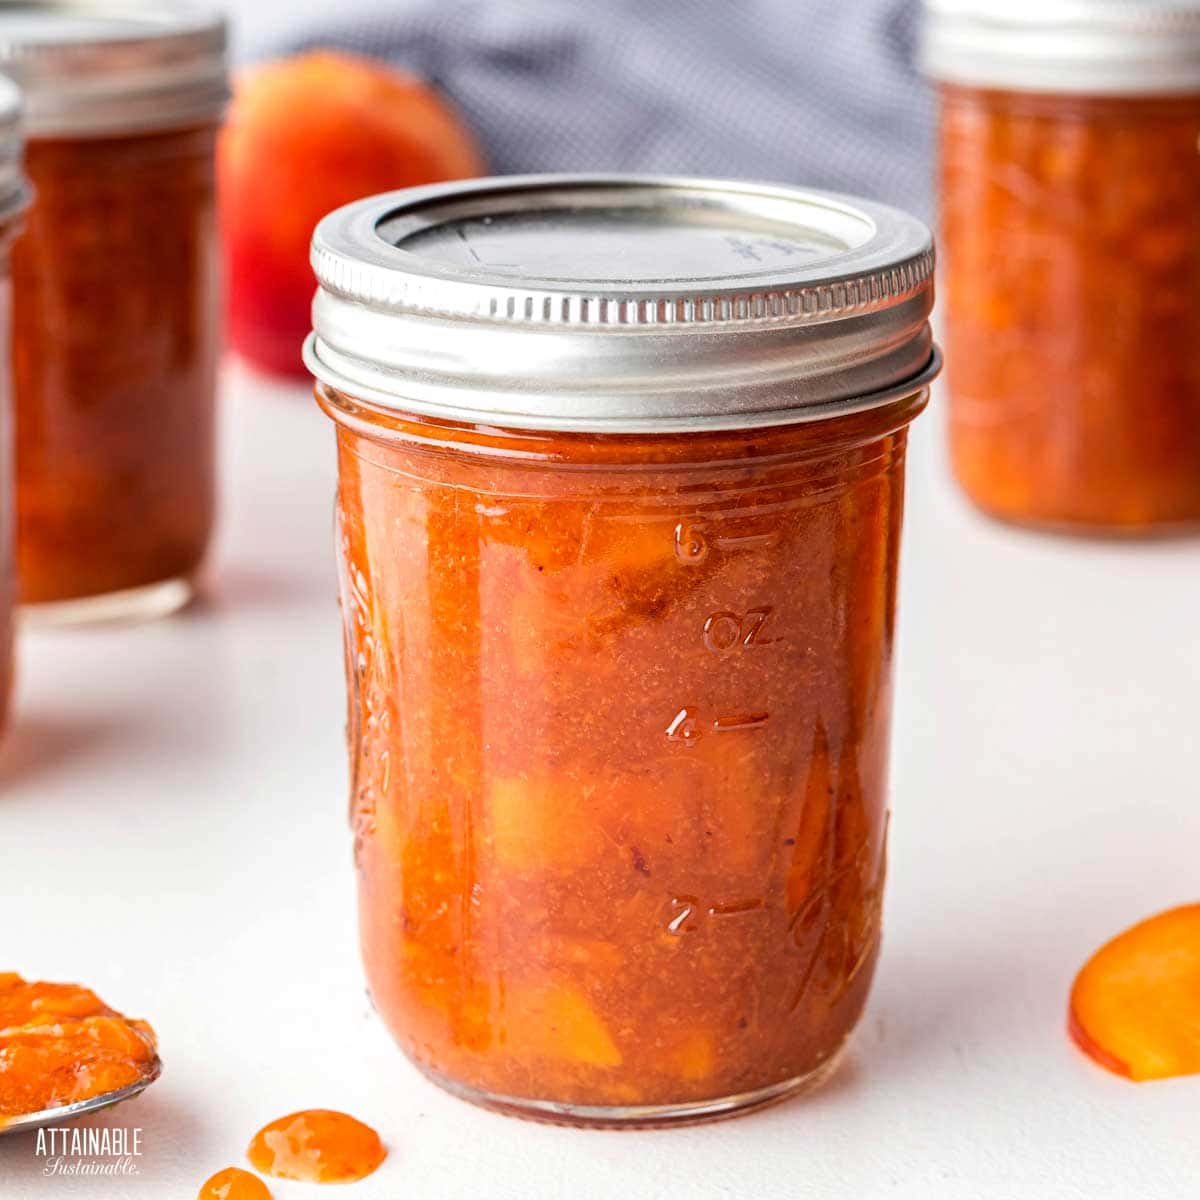 https://www.attainable-sustainable.net/wp-content/uploads/2022/10/peach-preserves-canning.jpg